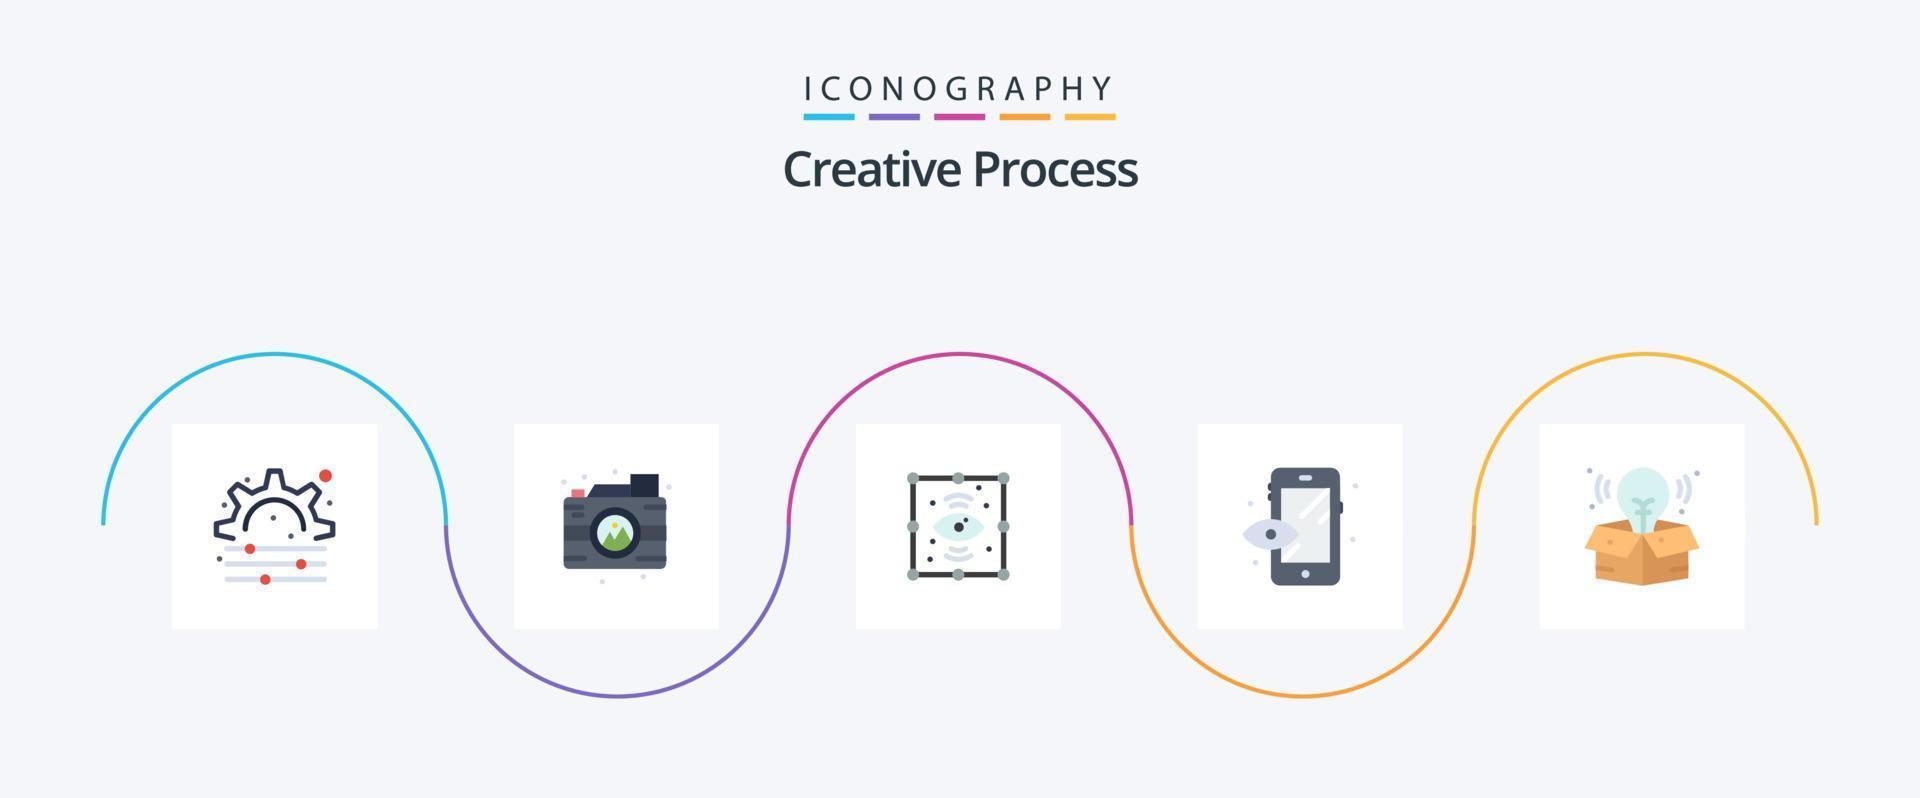 Creative Process Flat 5 Icon Pack Including . process. process. creative. process vector